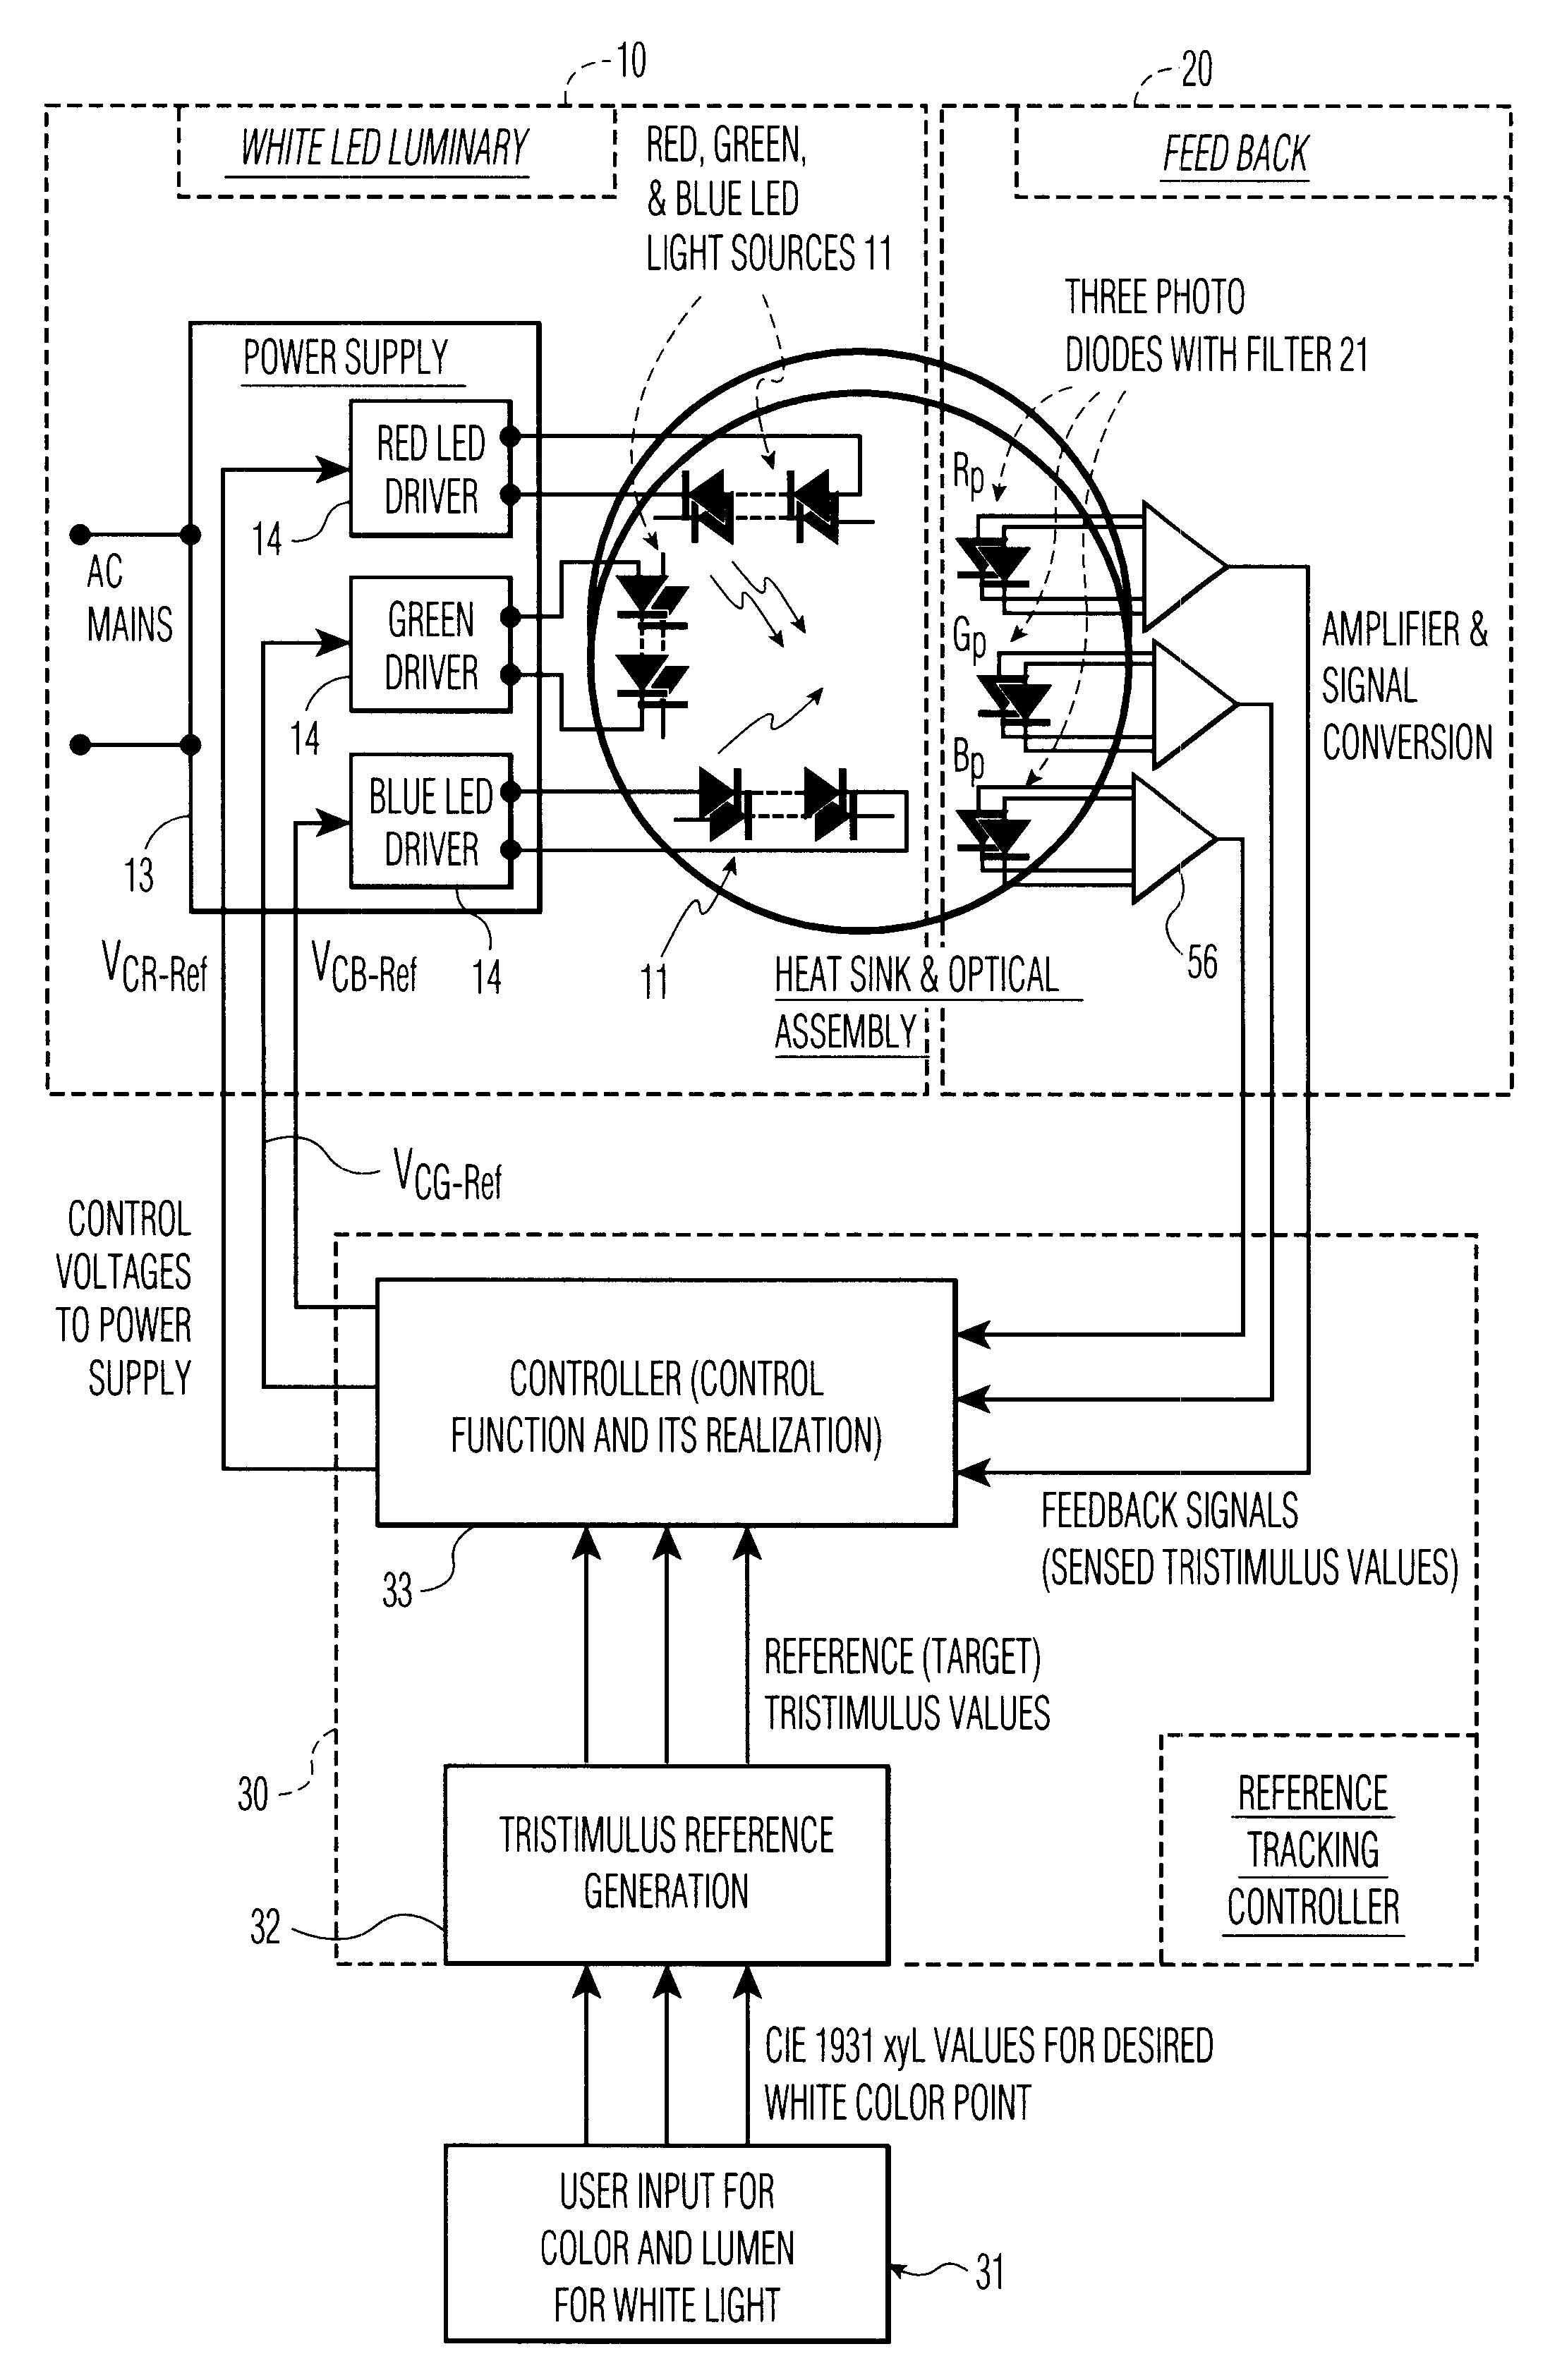 Controlling method and system for RGB based LED luminary